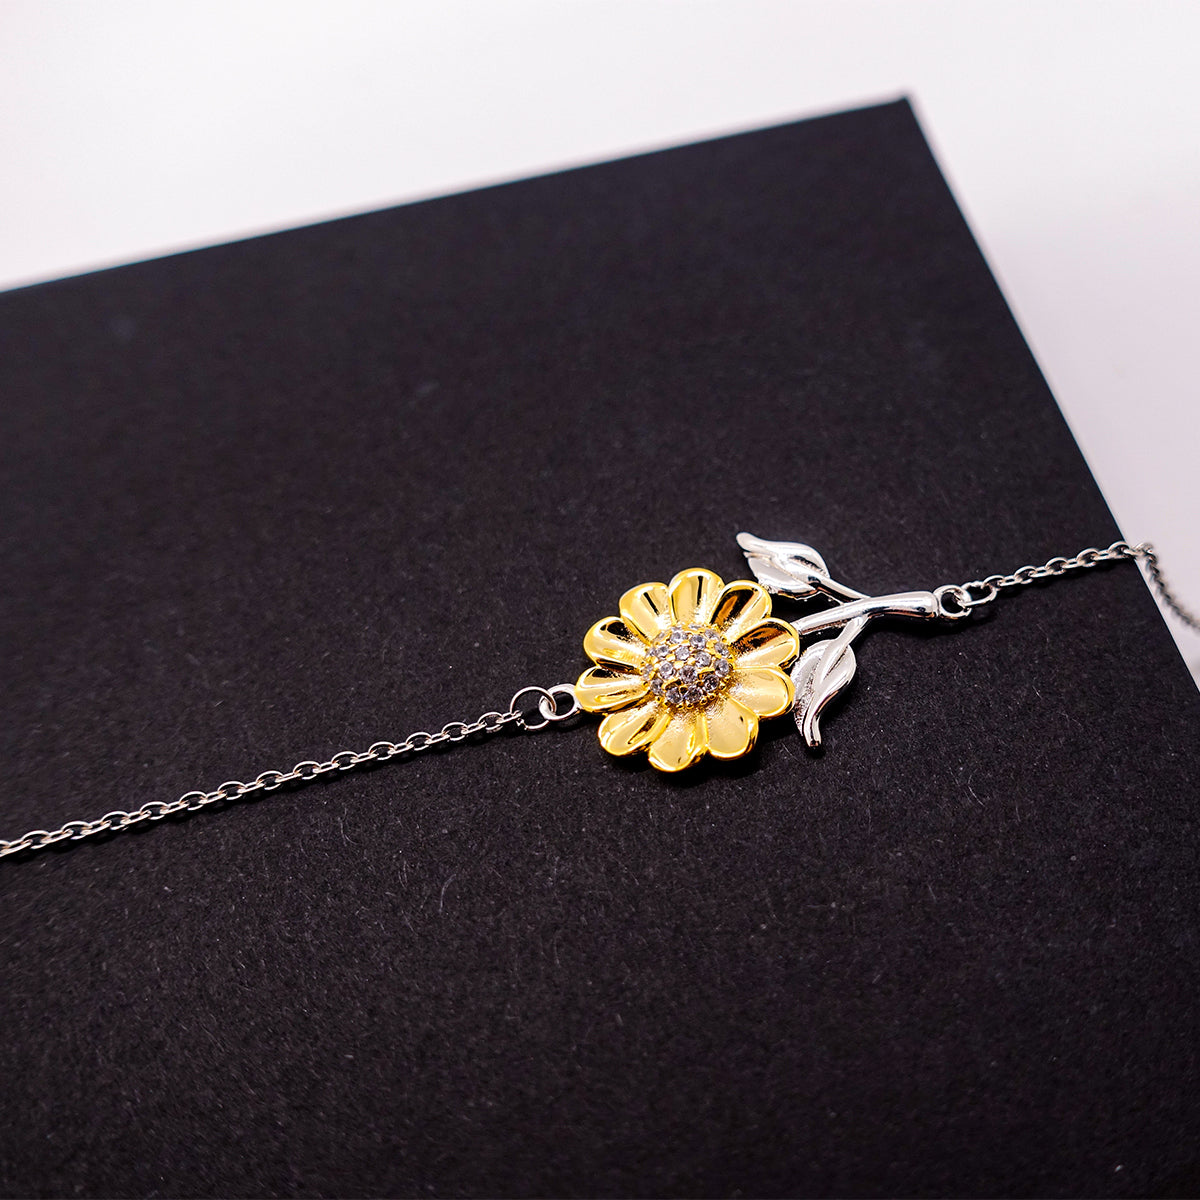 Unbiological Mom Sunflower Bracelet - You will always have a special place in my heart - Inspirational Gift for Mothers Day, Birthday, Christmas - Unique Engraved Jewelry for Step Mom, Bonus Mom, Stepmother